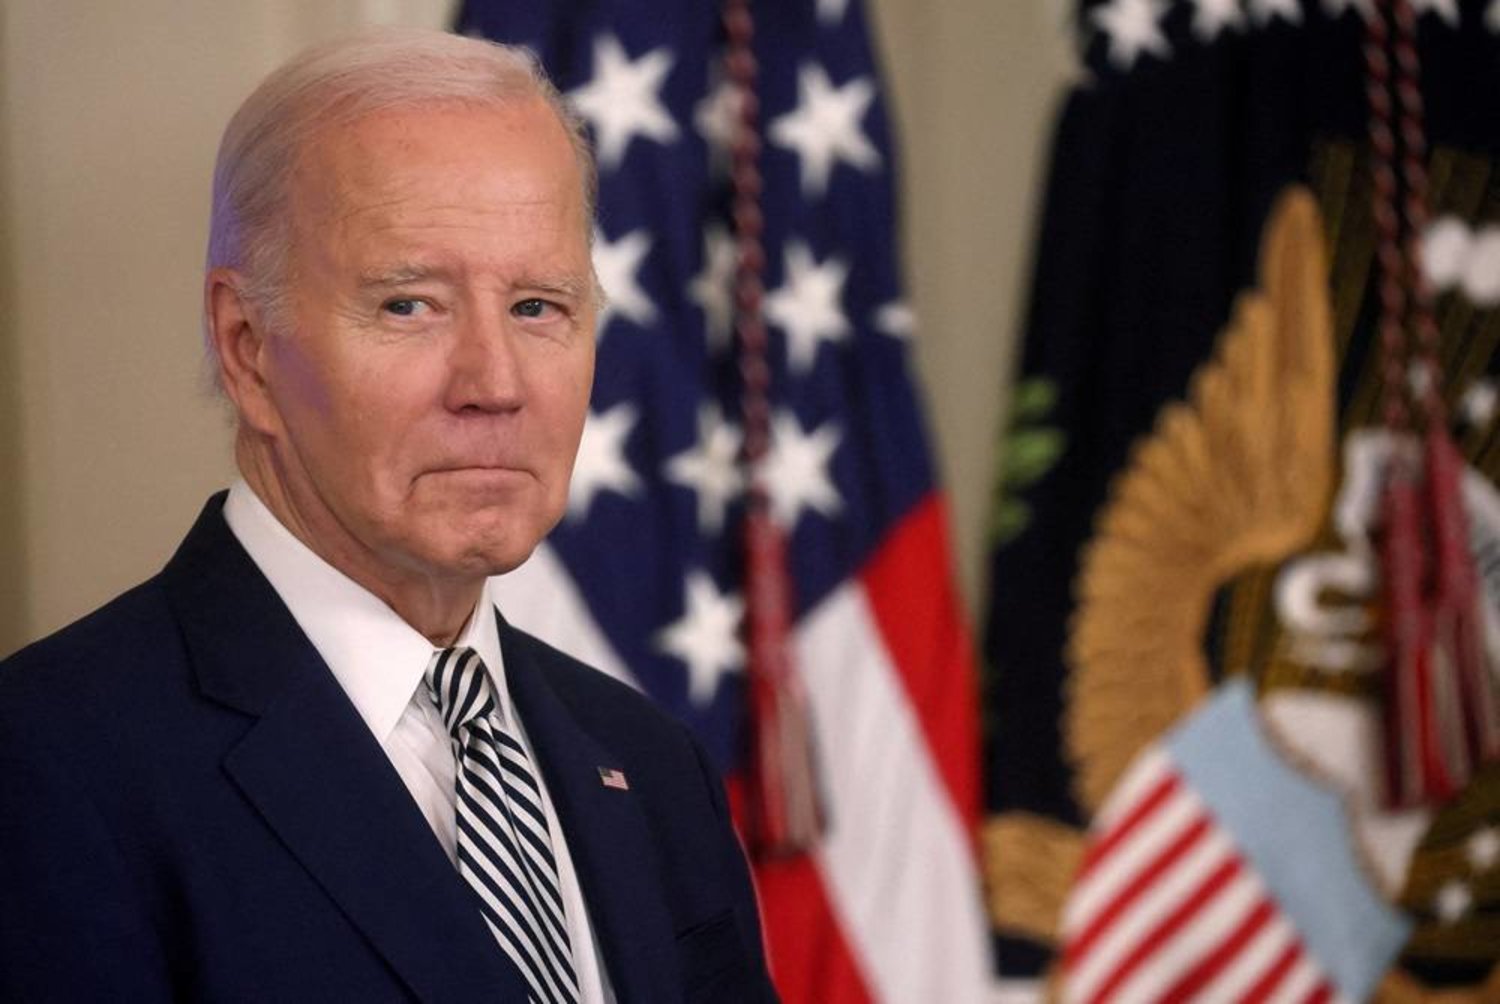 Biden emphasizes Arab nations' readiness to recognize Israel (Credits: Reuters)